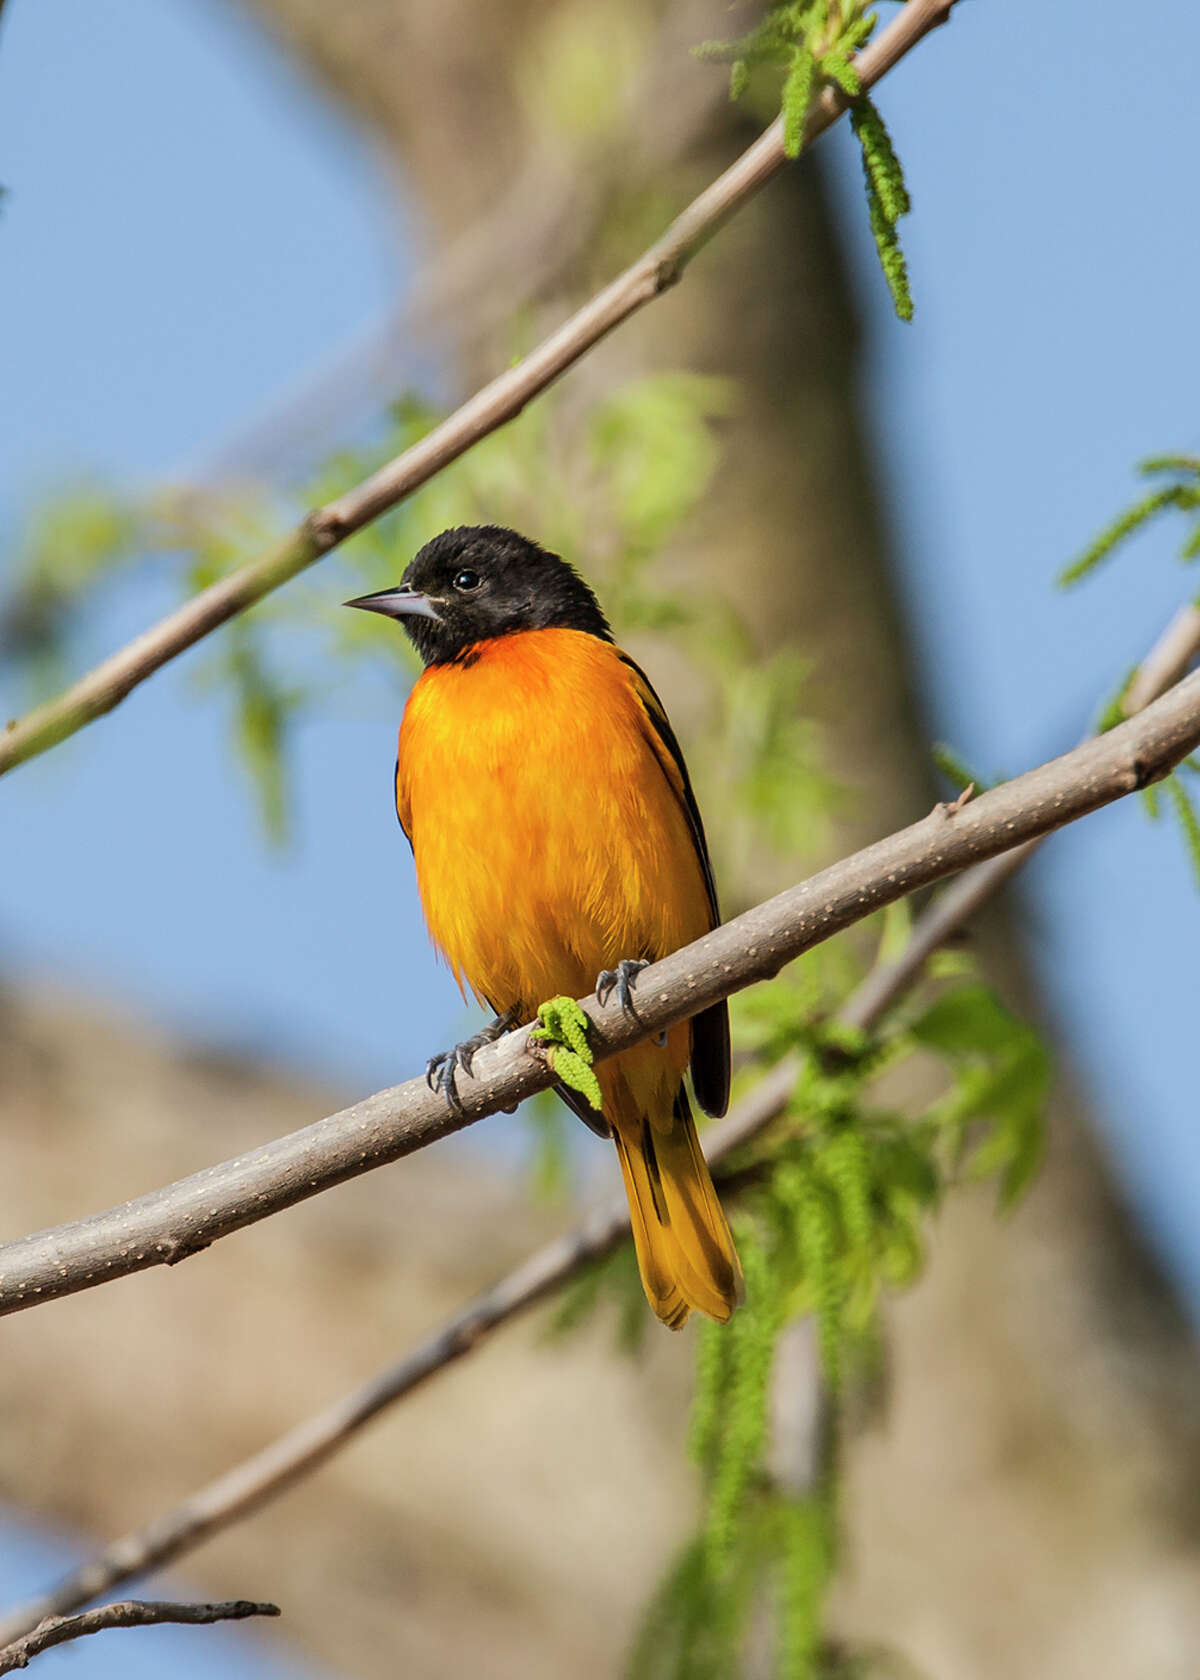 Baltimore orioles have a bright-orange breast with a black hood and black back.